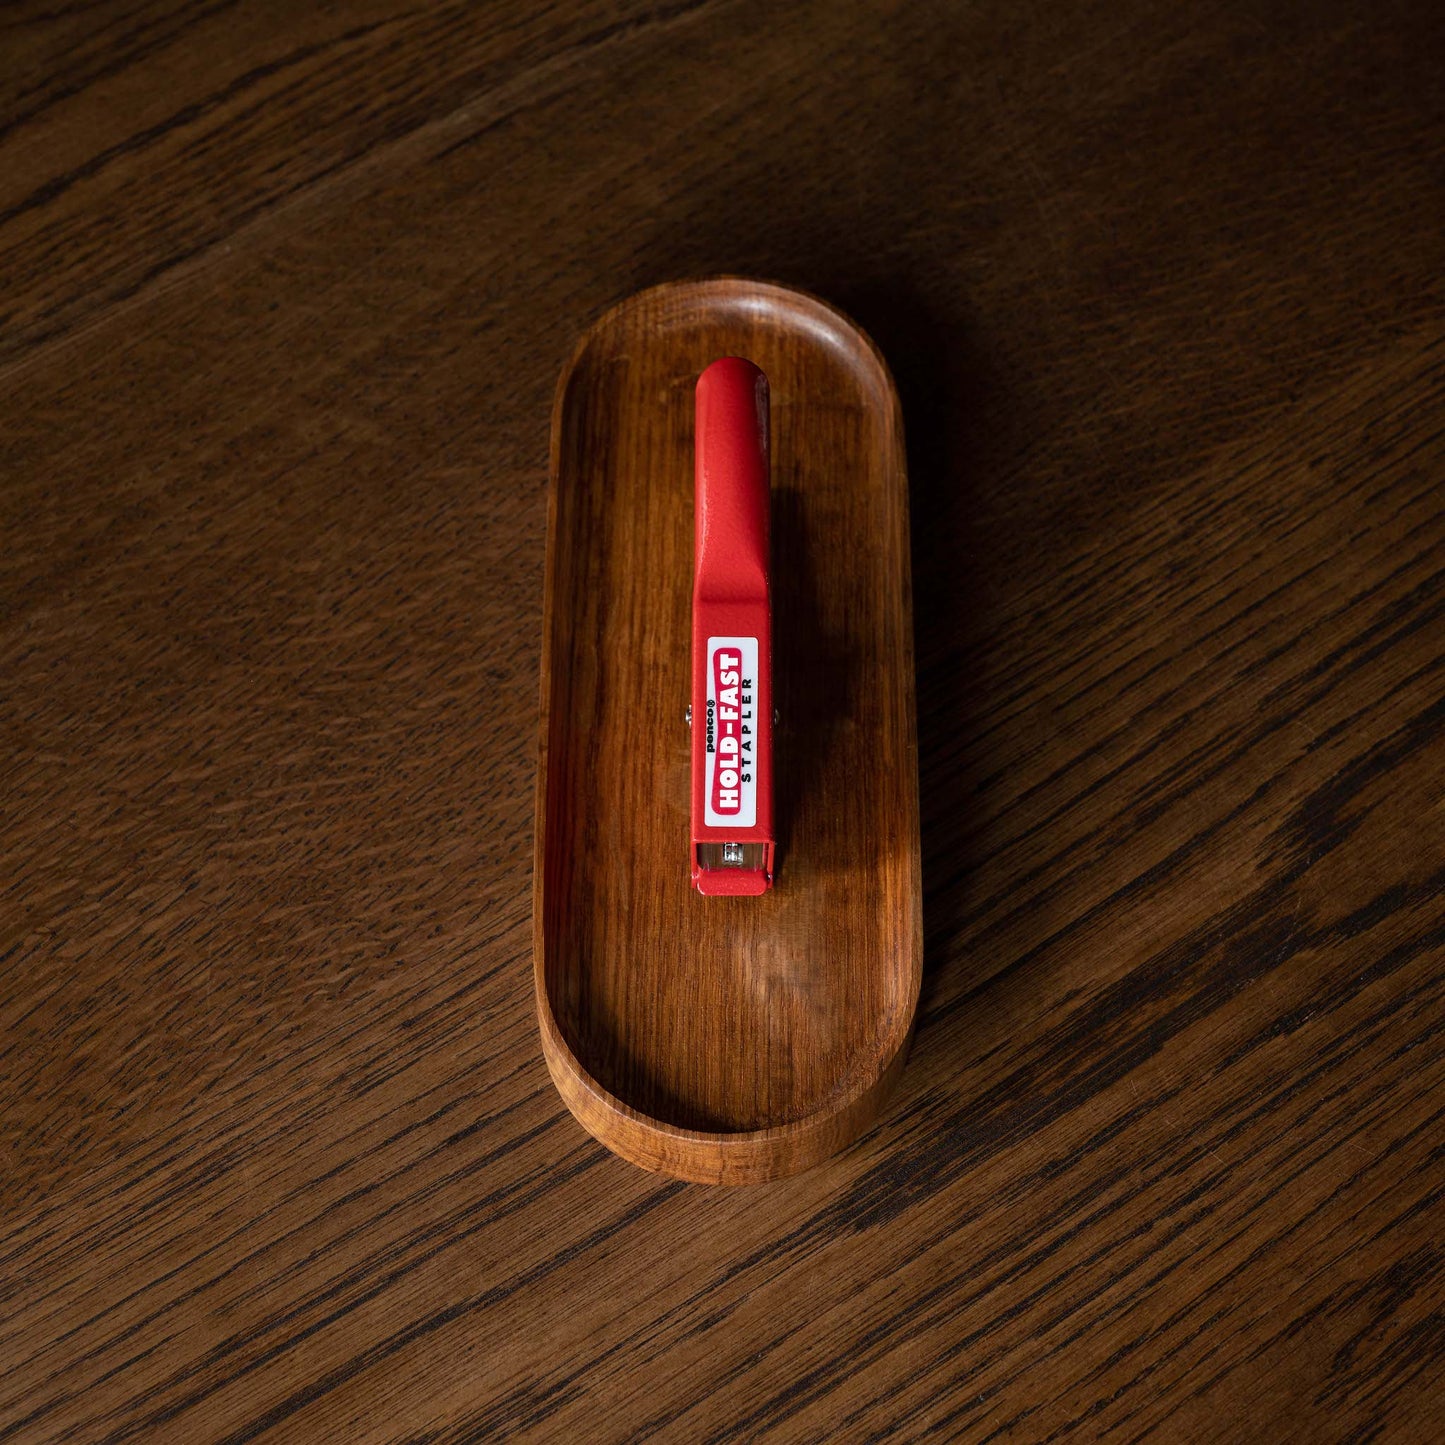 Top view of Penco Red Stapler on pen tray